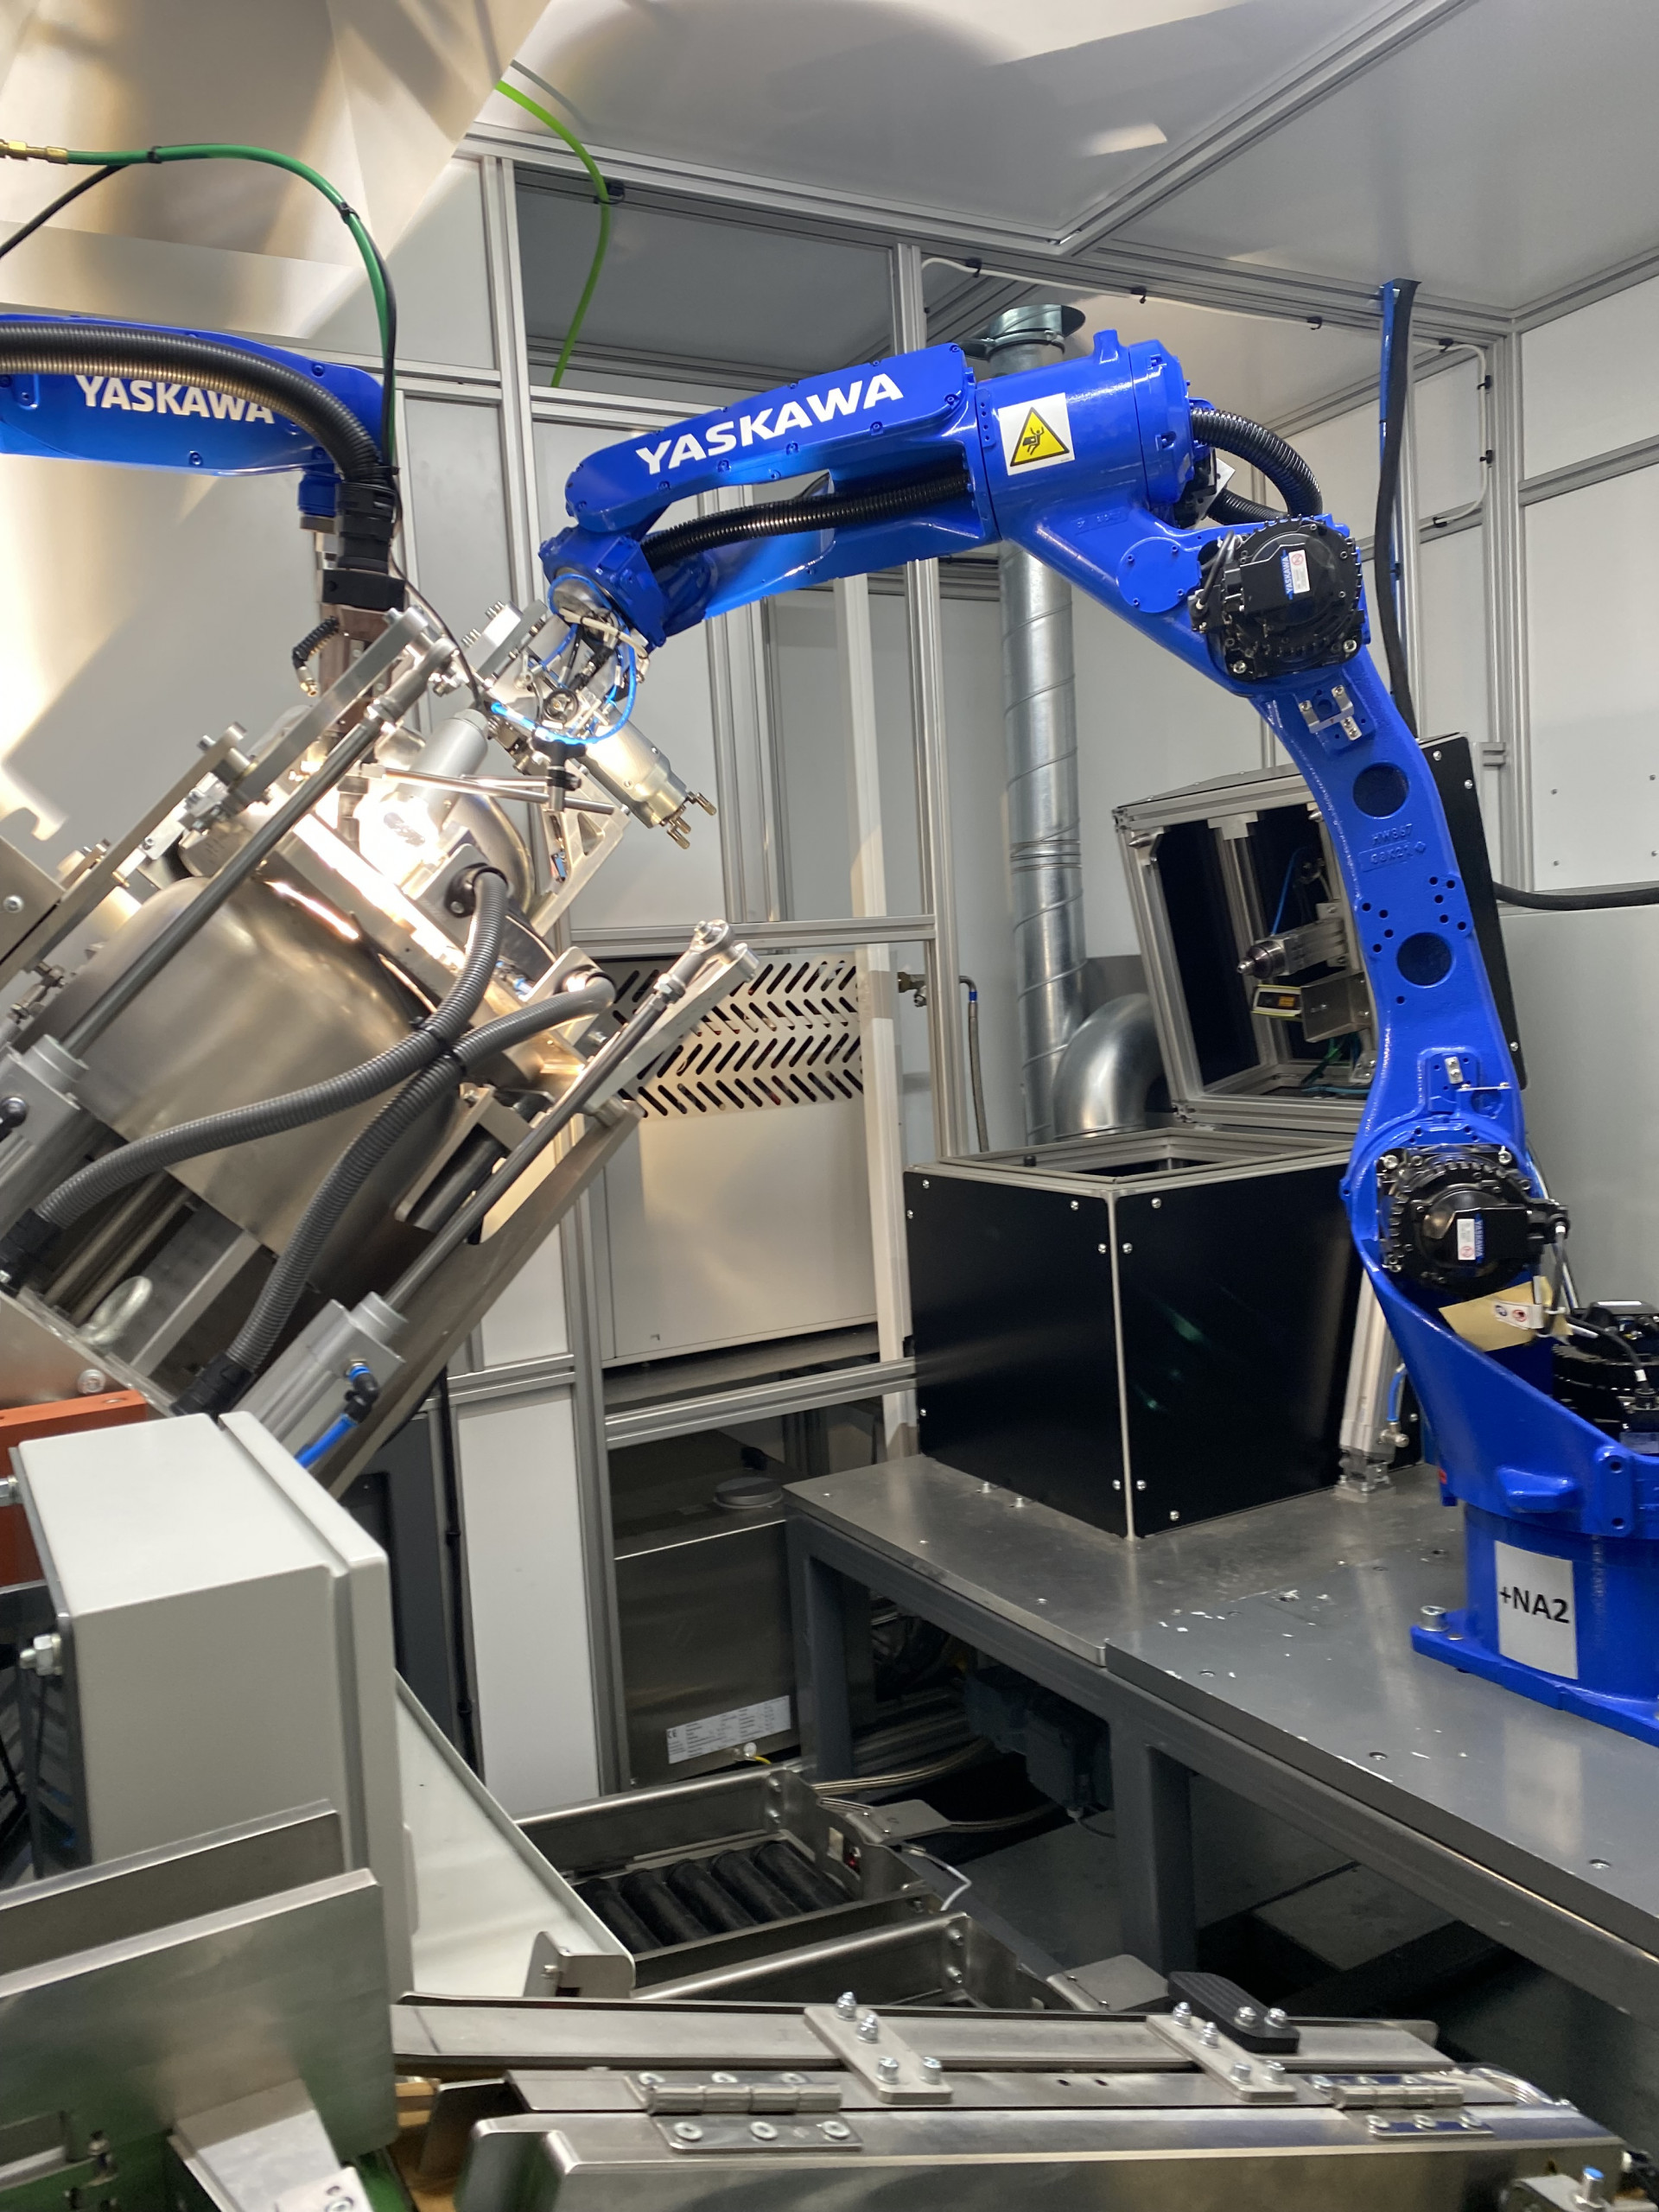 The two Motoman industrial robots literally work 